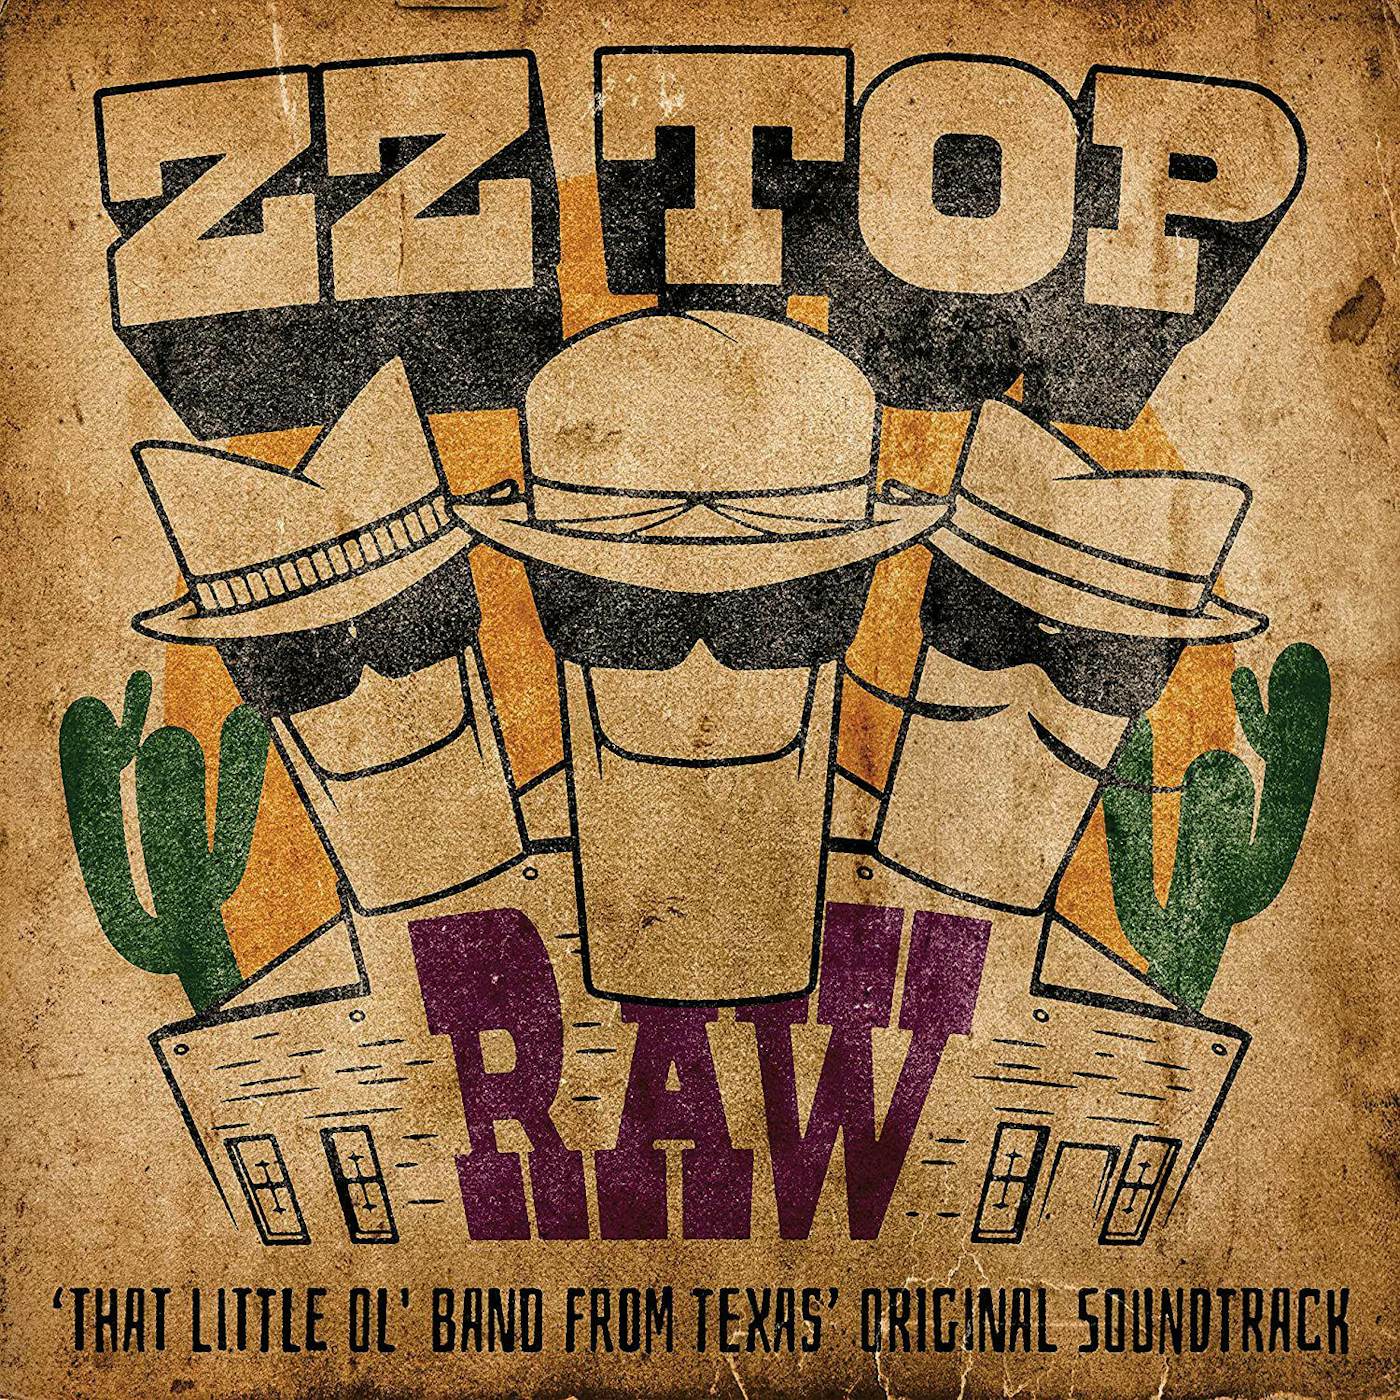 ZZ Top RAW ('That Little Ol' Band From Texas' Original Soundtrack) Vinyl Record